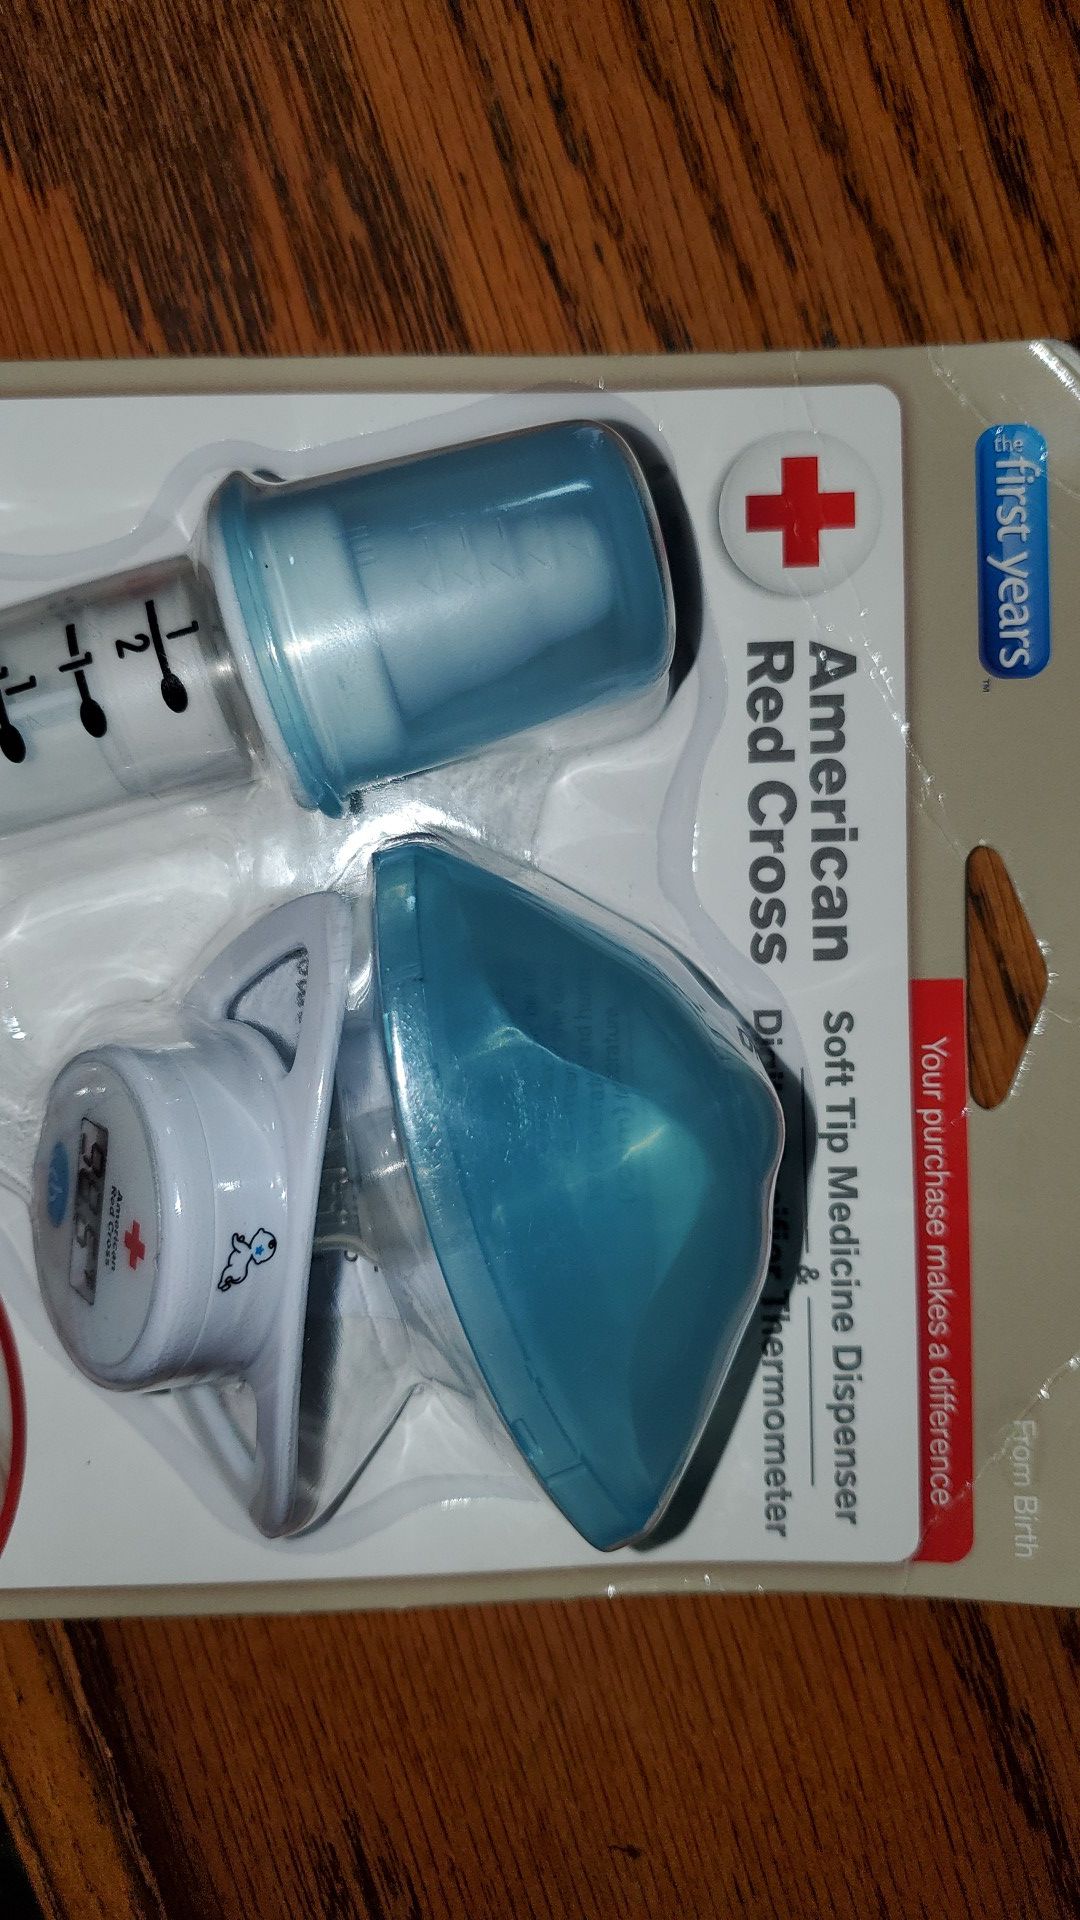 American Red Cross soft-tip medicine dispenser and digital pacifier thermometer